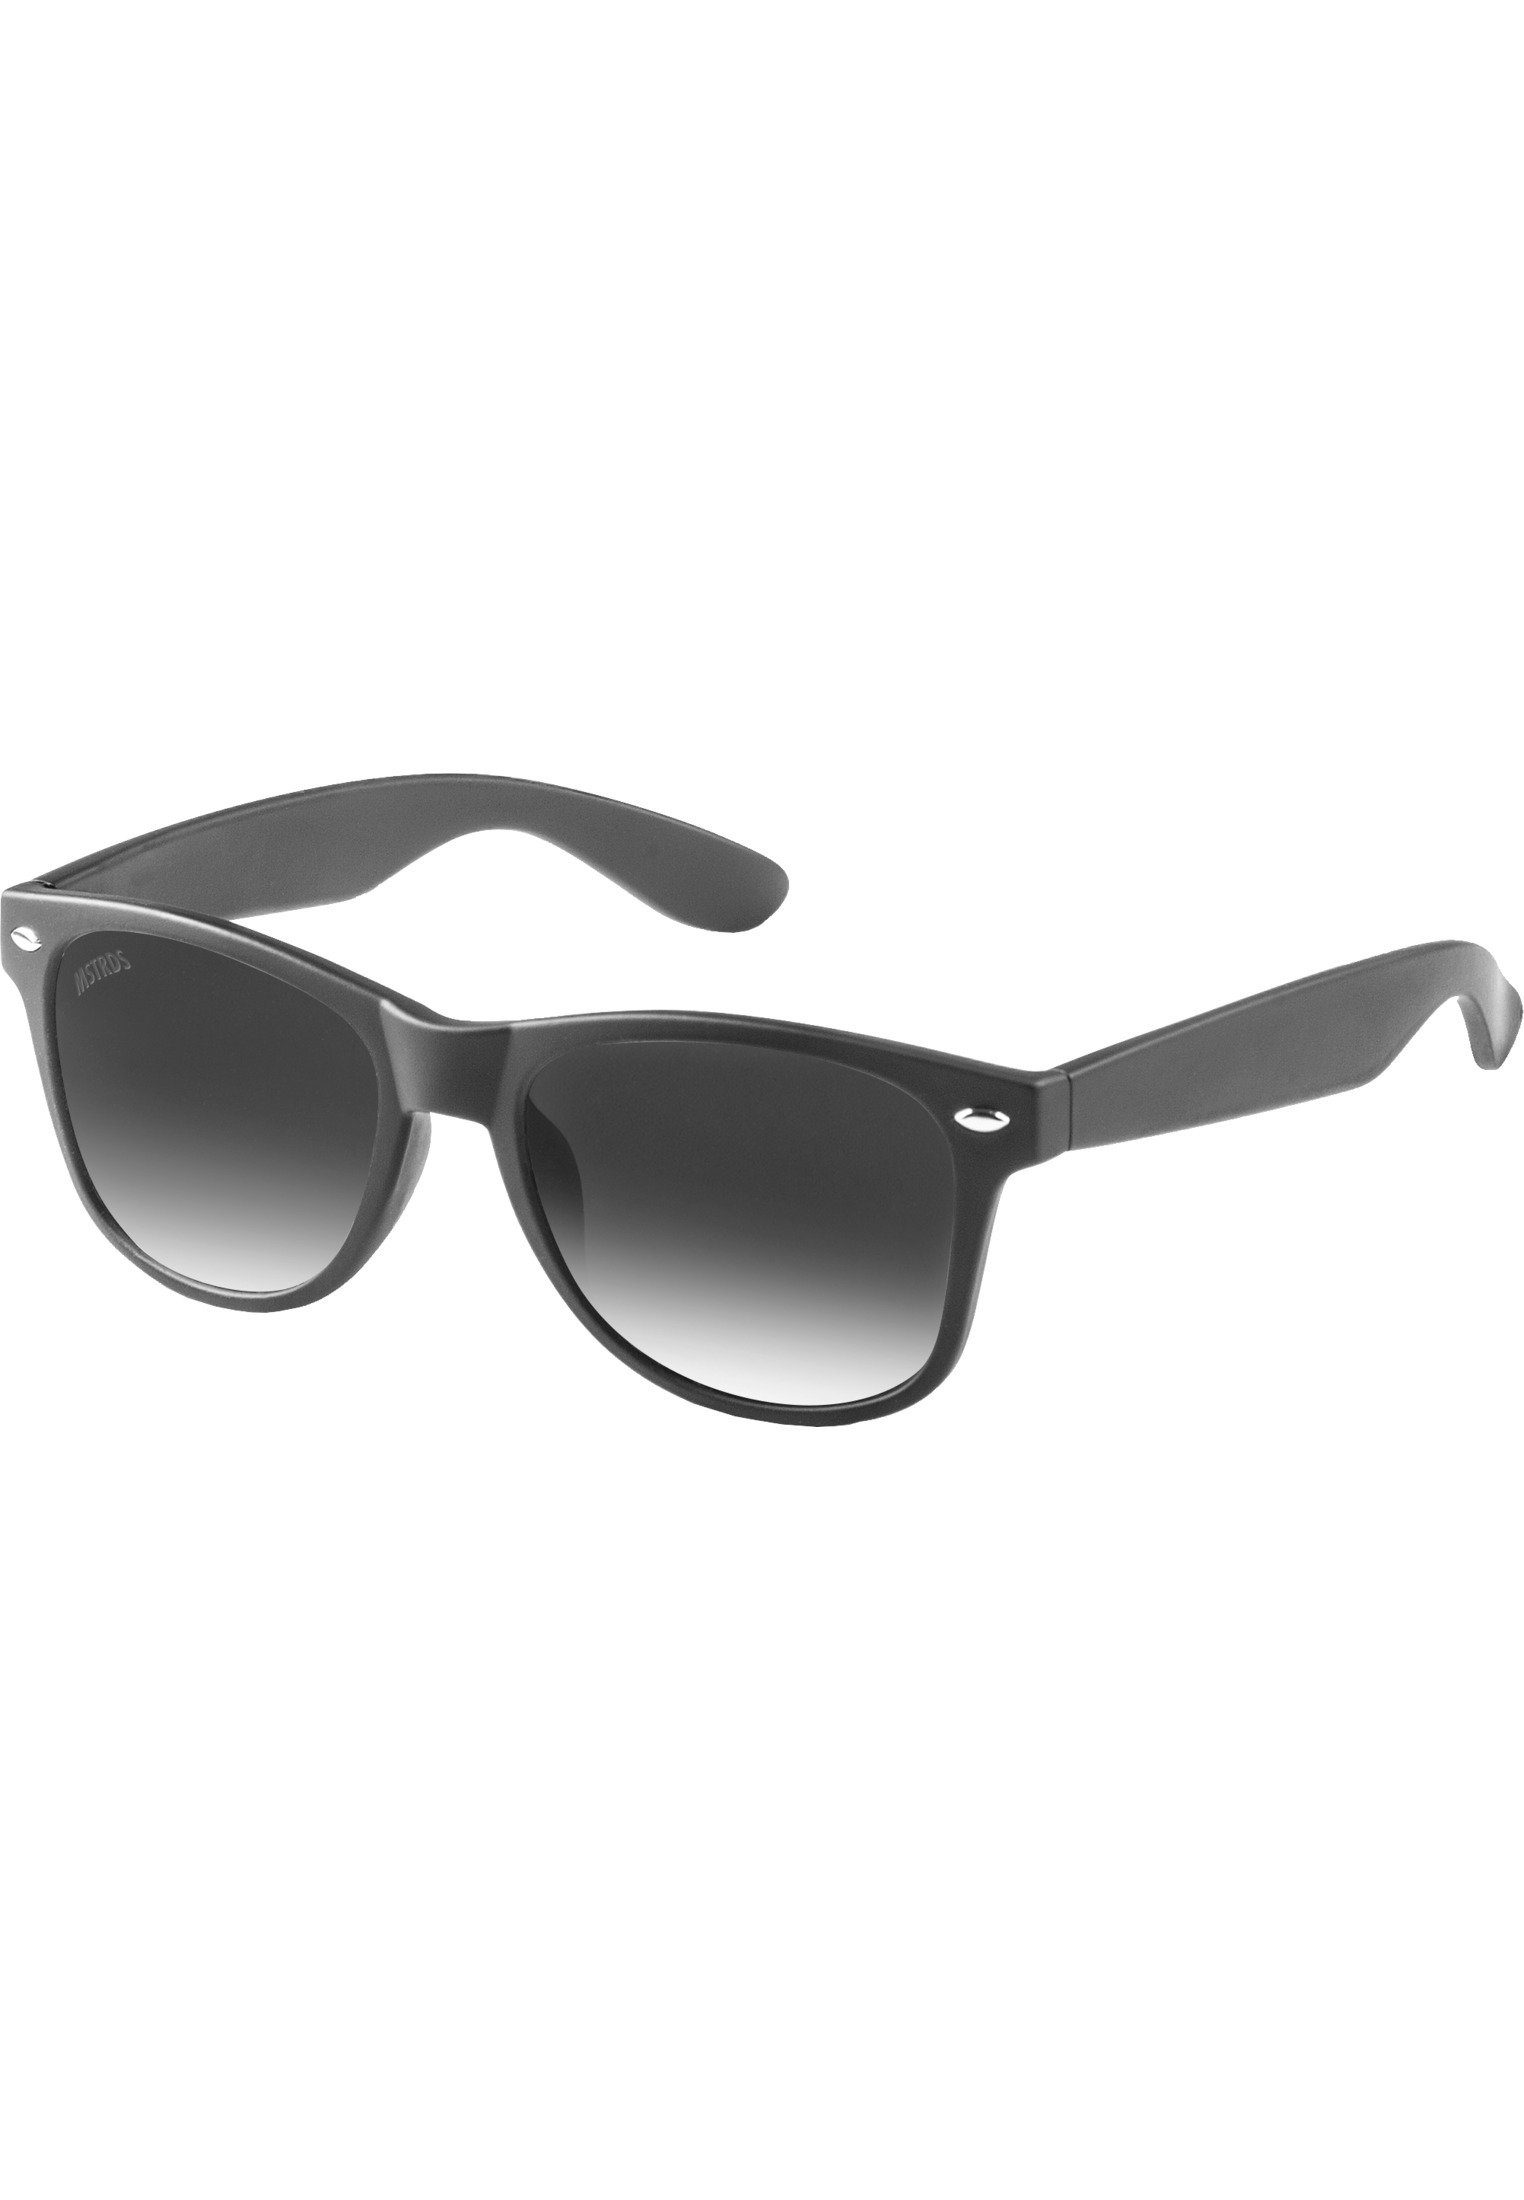 MSTRDS Sonnenbrille Accessoires Sunglasses Likoma Youth blk/gry